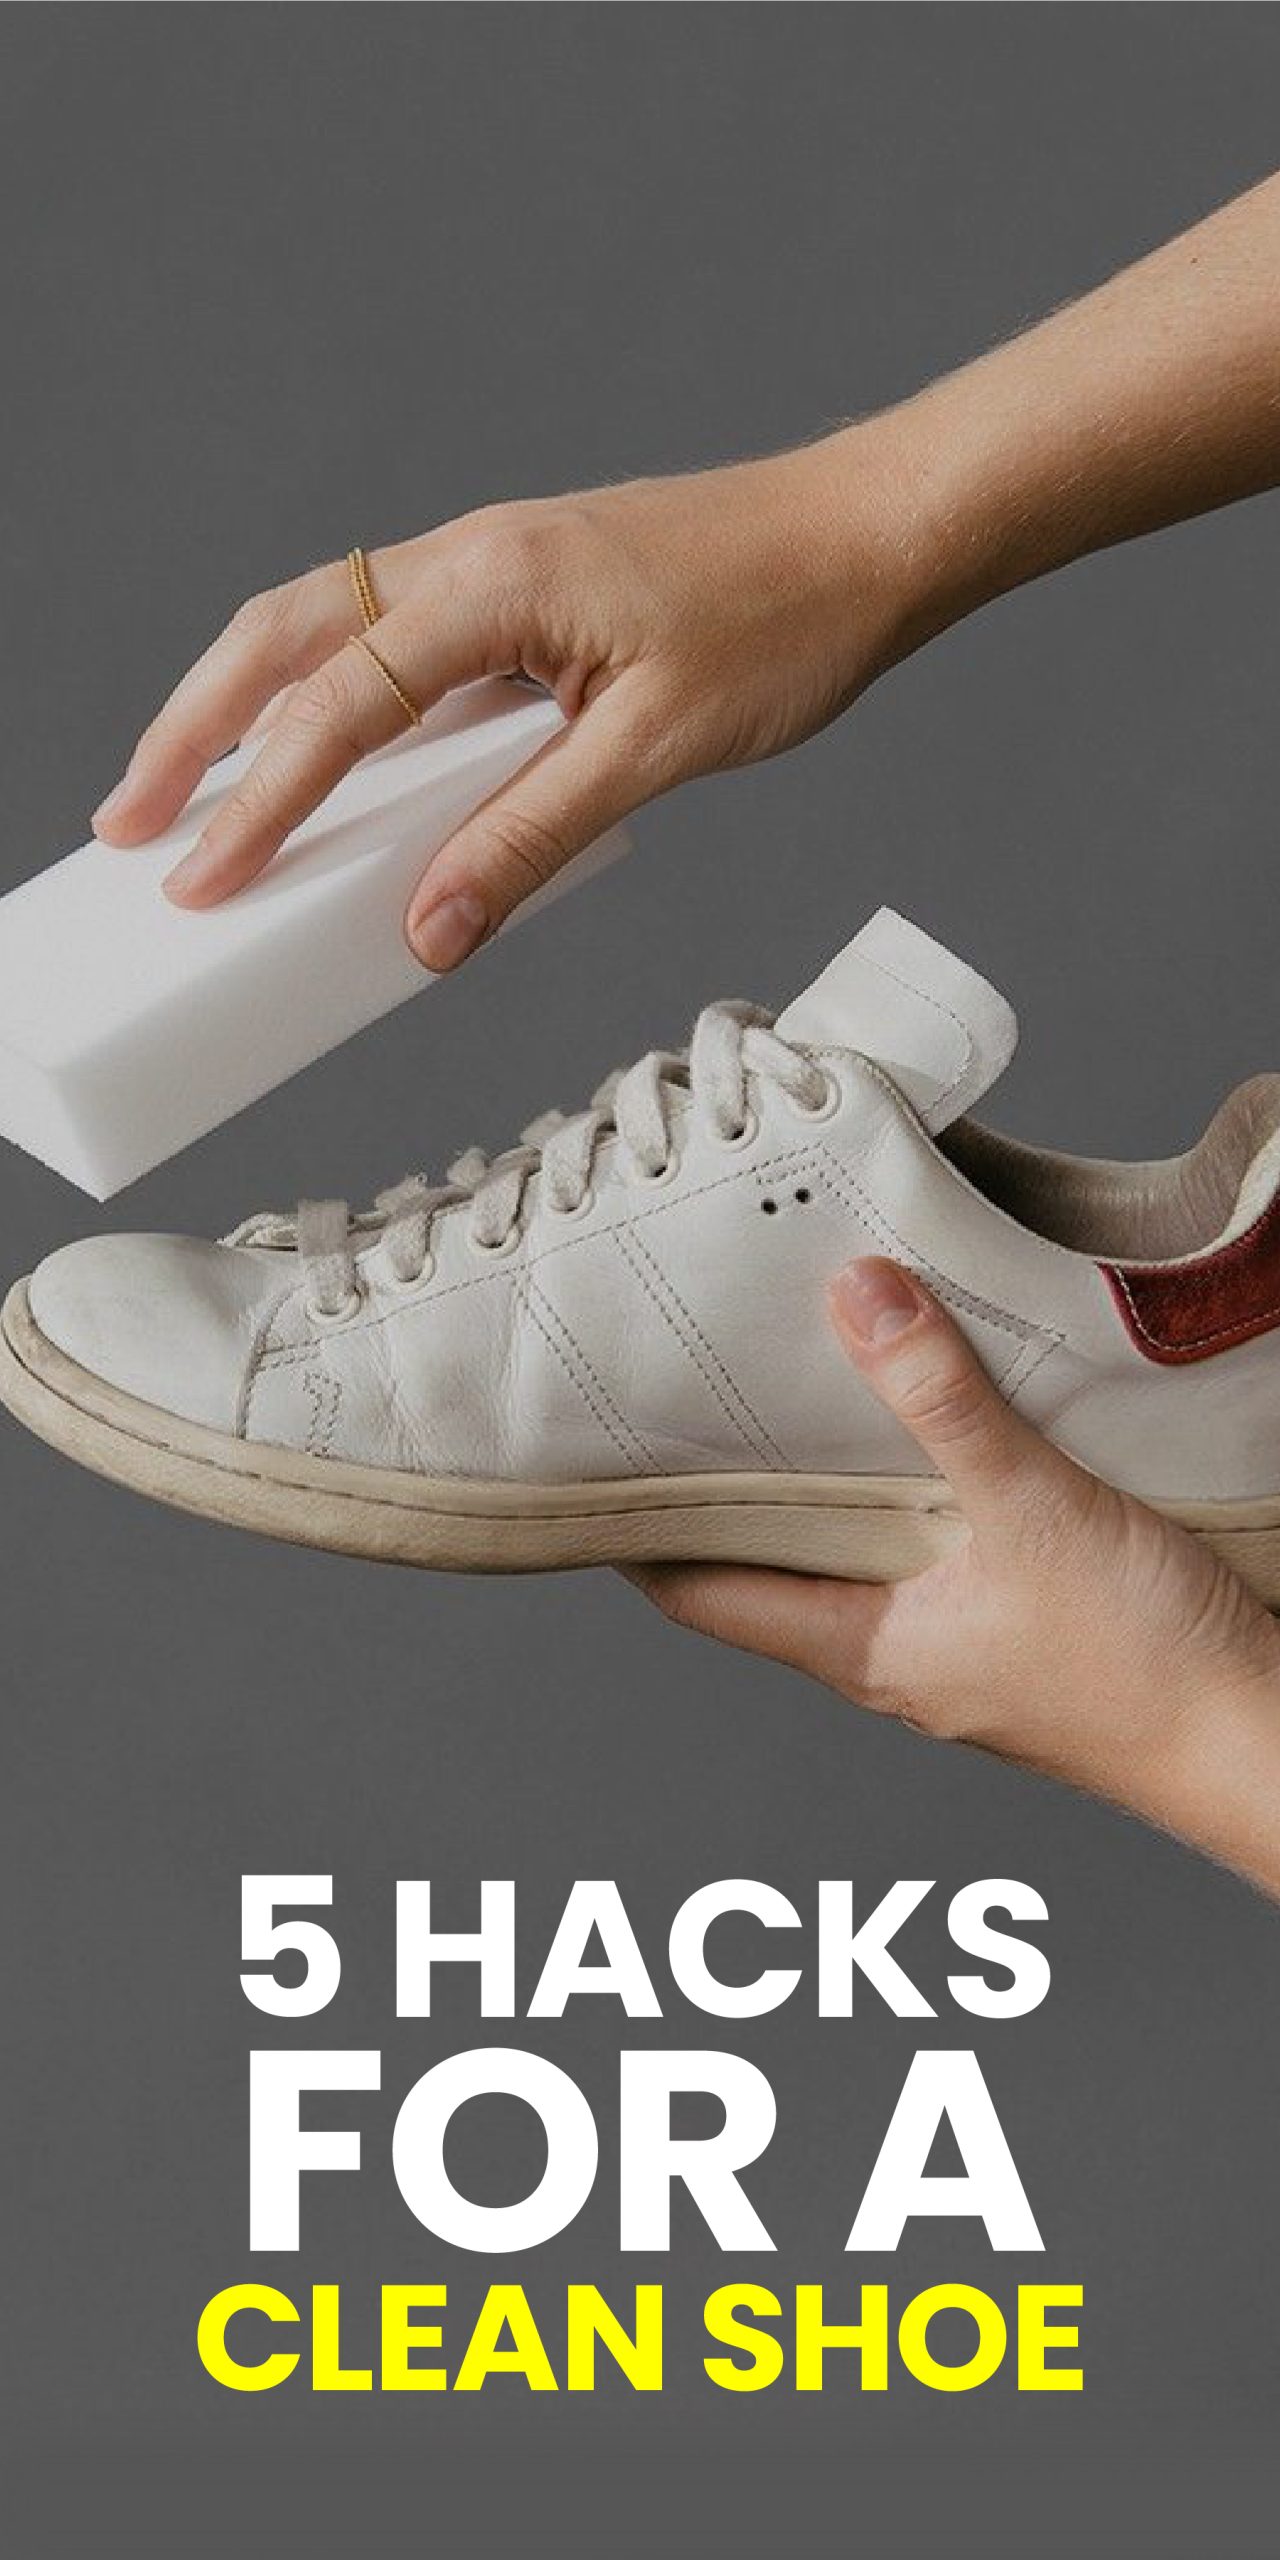 5 HACKS FOR A CLEAN SHOE